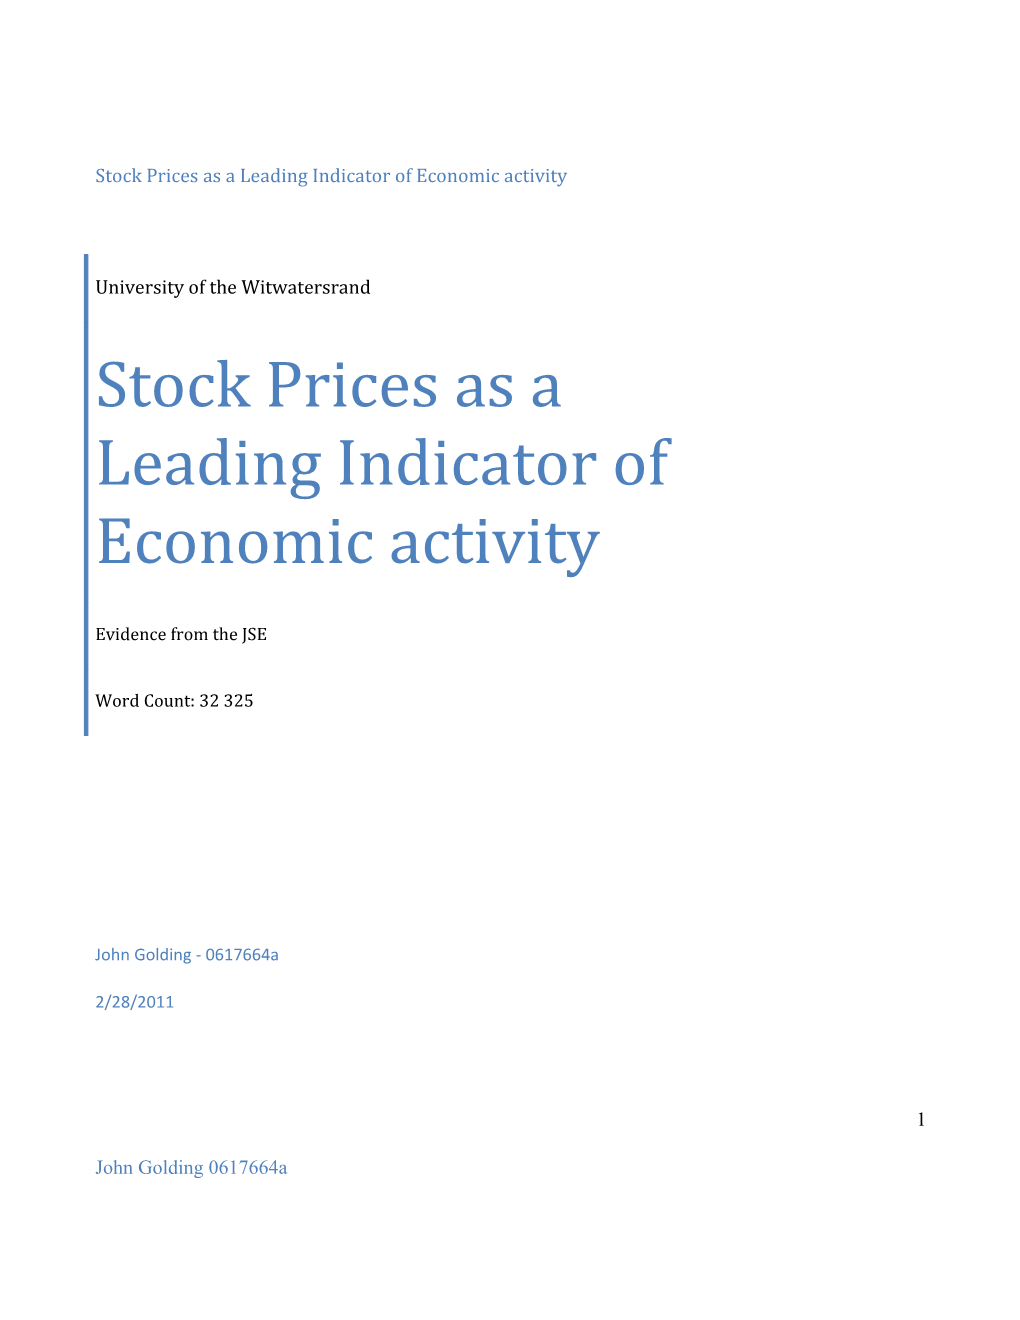 Stock Prices As a Leading Indicator of Economic Activity